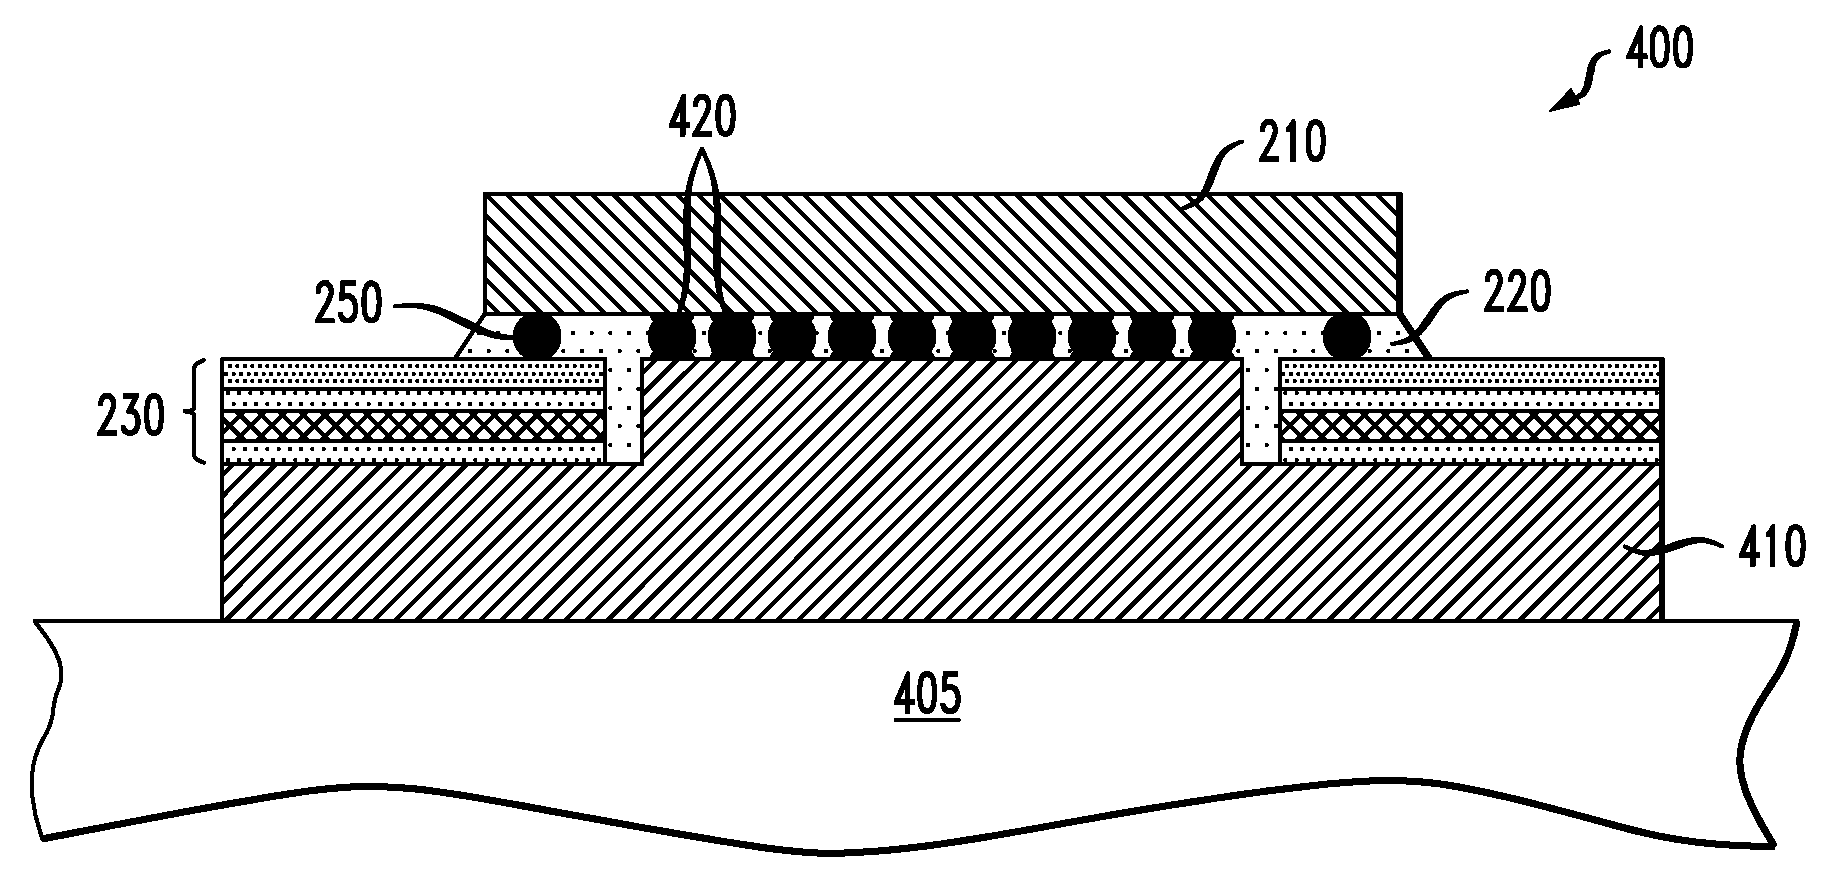 Flip Chip Assembly Having Improved Thermal Dissipation